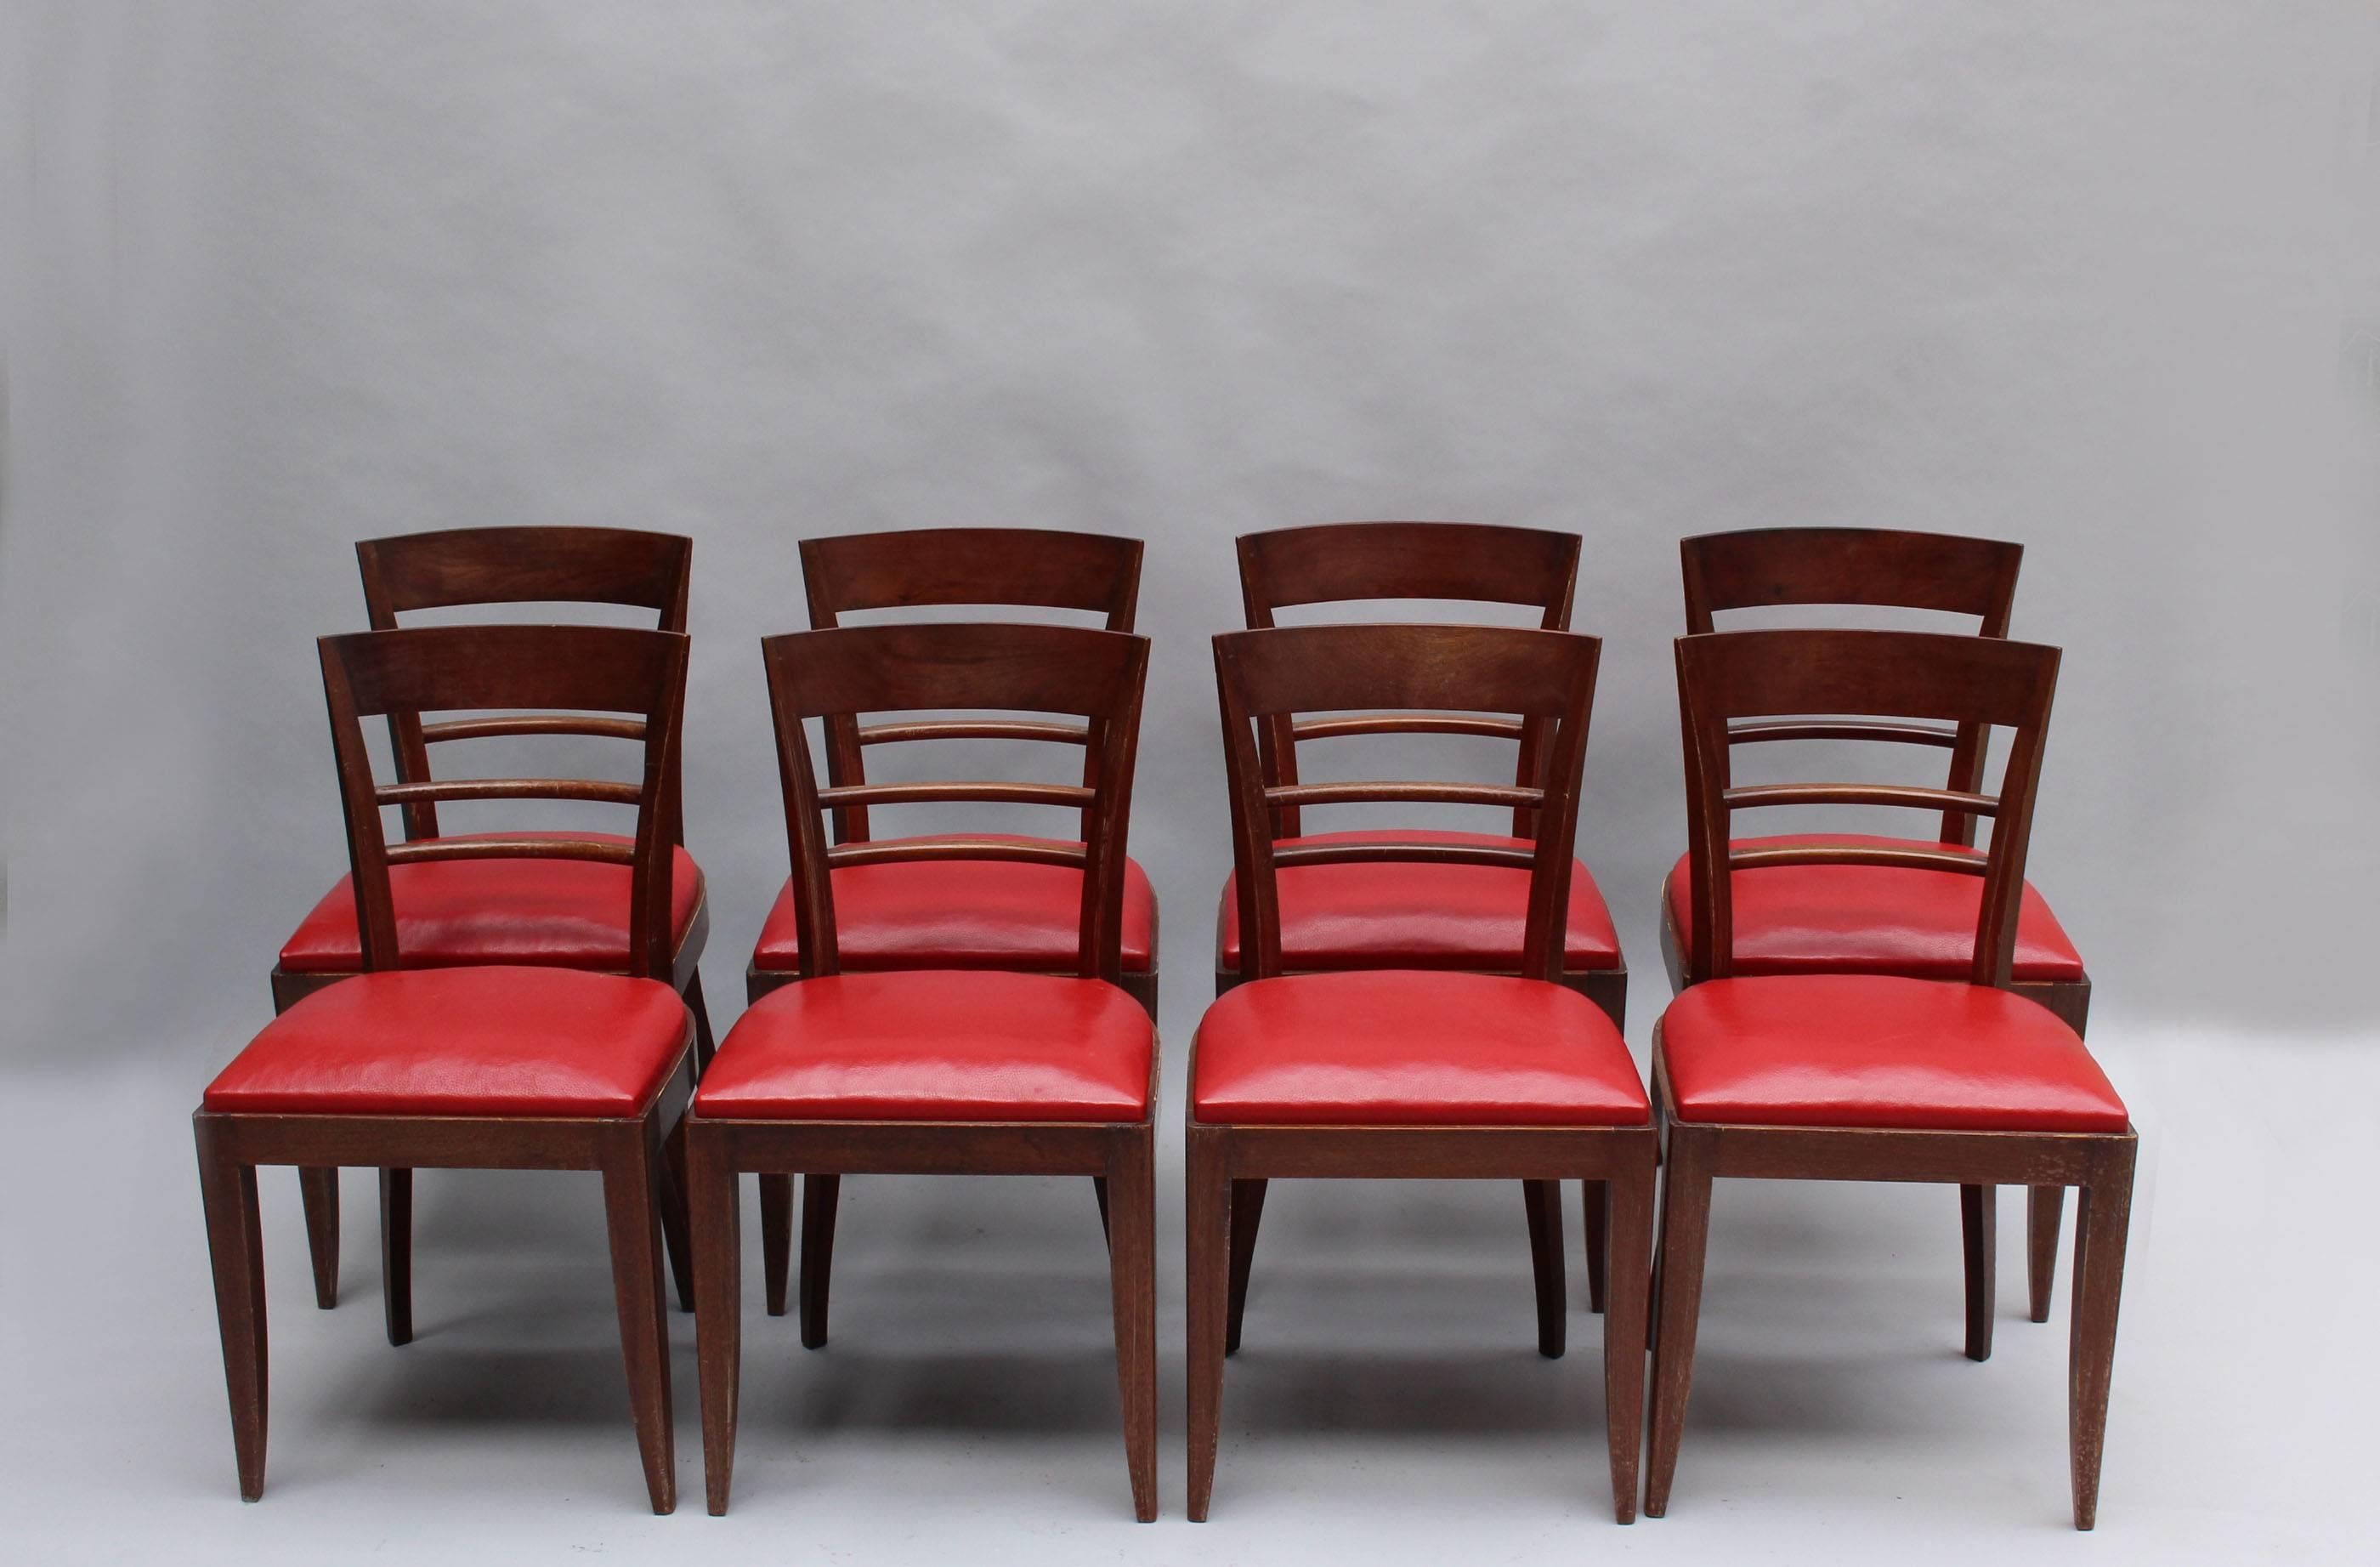 A set of ten fine French Art Deco mahogany dining chairs (8 side + 2 arm)
Dimensions:
Side H 32”1/2 x W 18”1/8 x D 19”5/8
Arm H 32”7/8 x W 22”7/8 x D 21”1/2.
Seat height 18 1/8